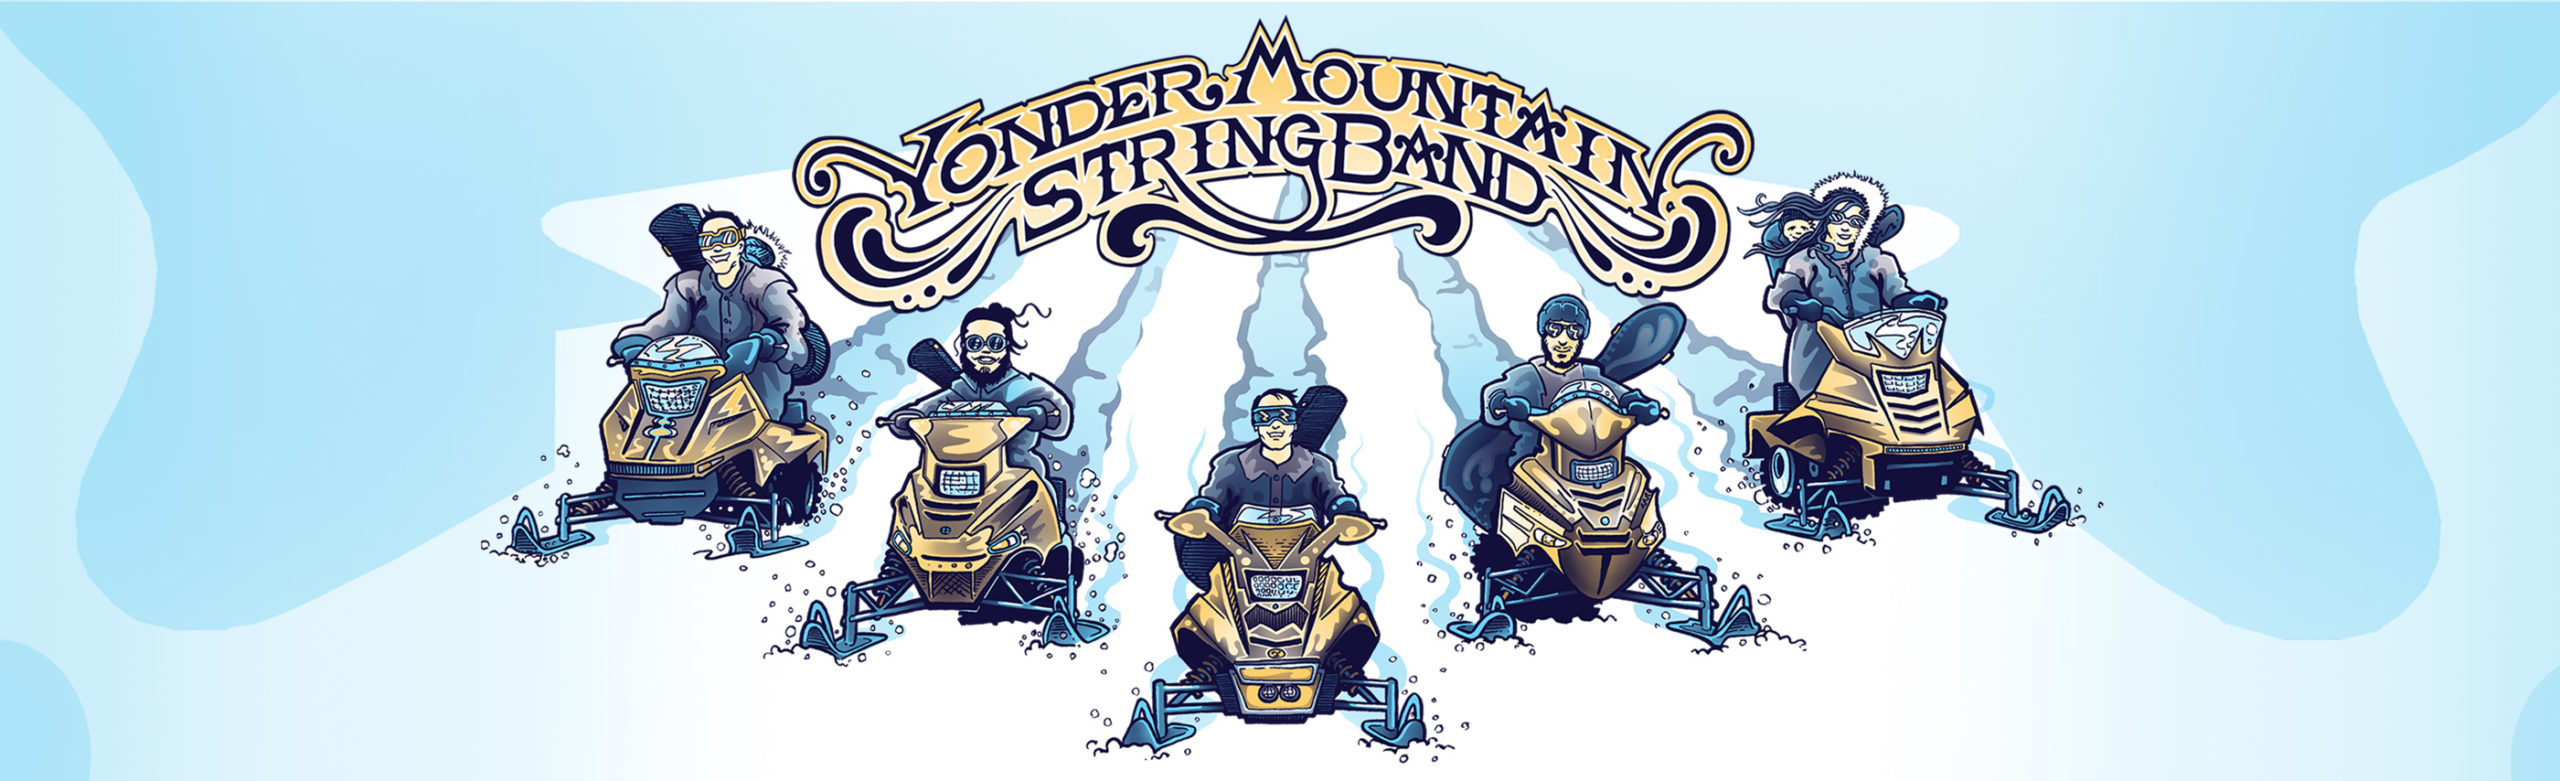 Yonder Mountain String Band Ticket + Merch Giveaway Image